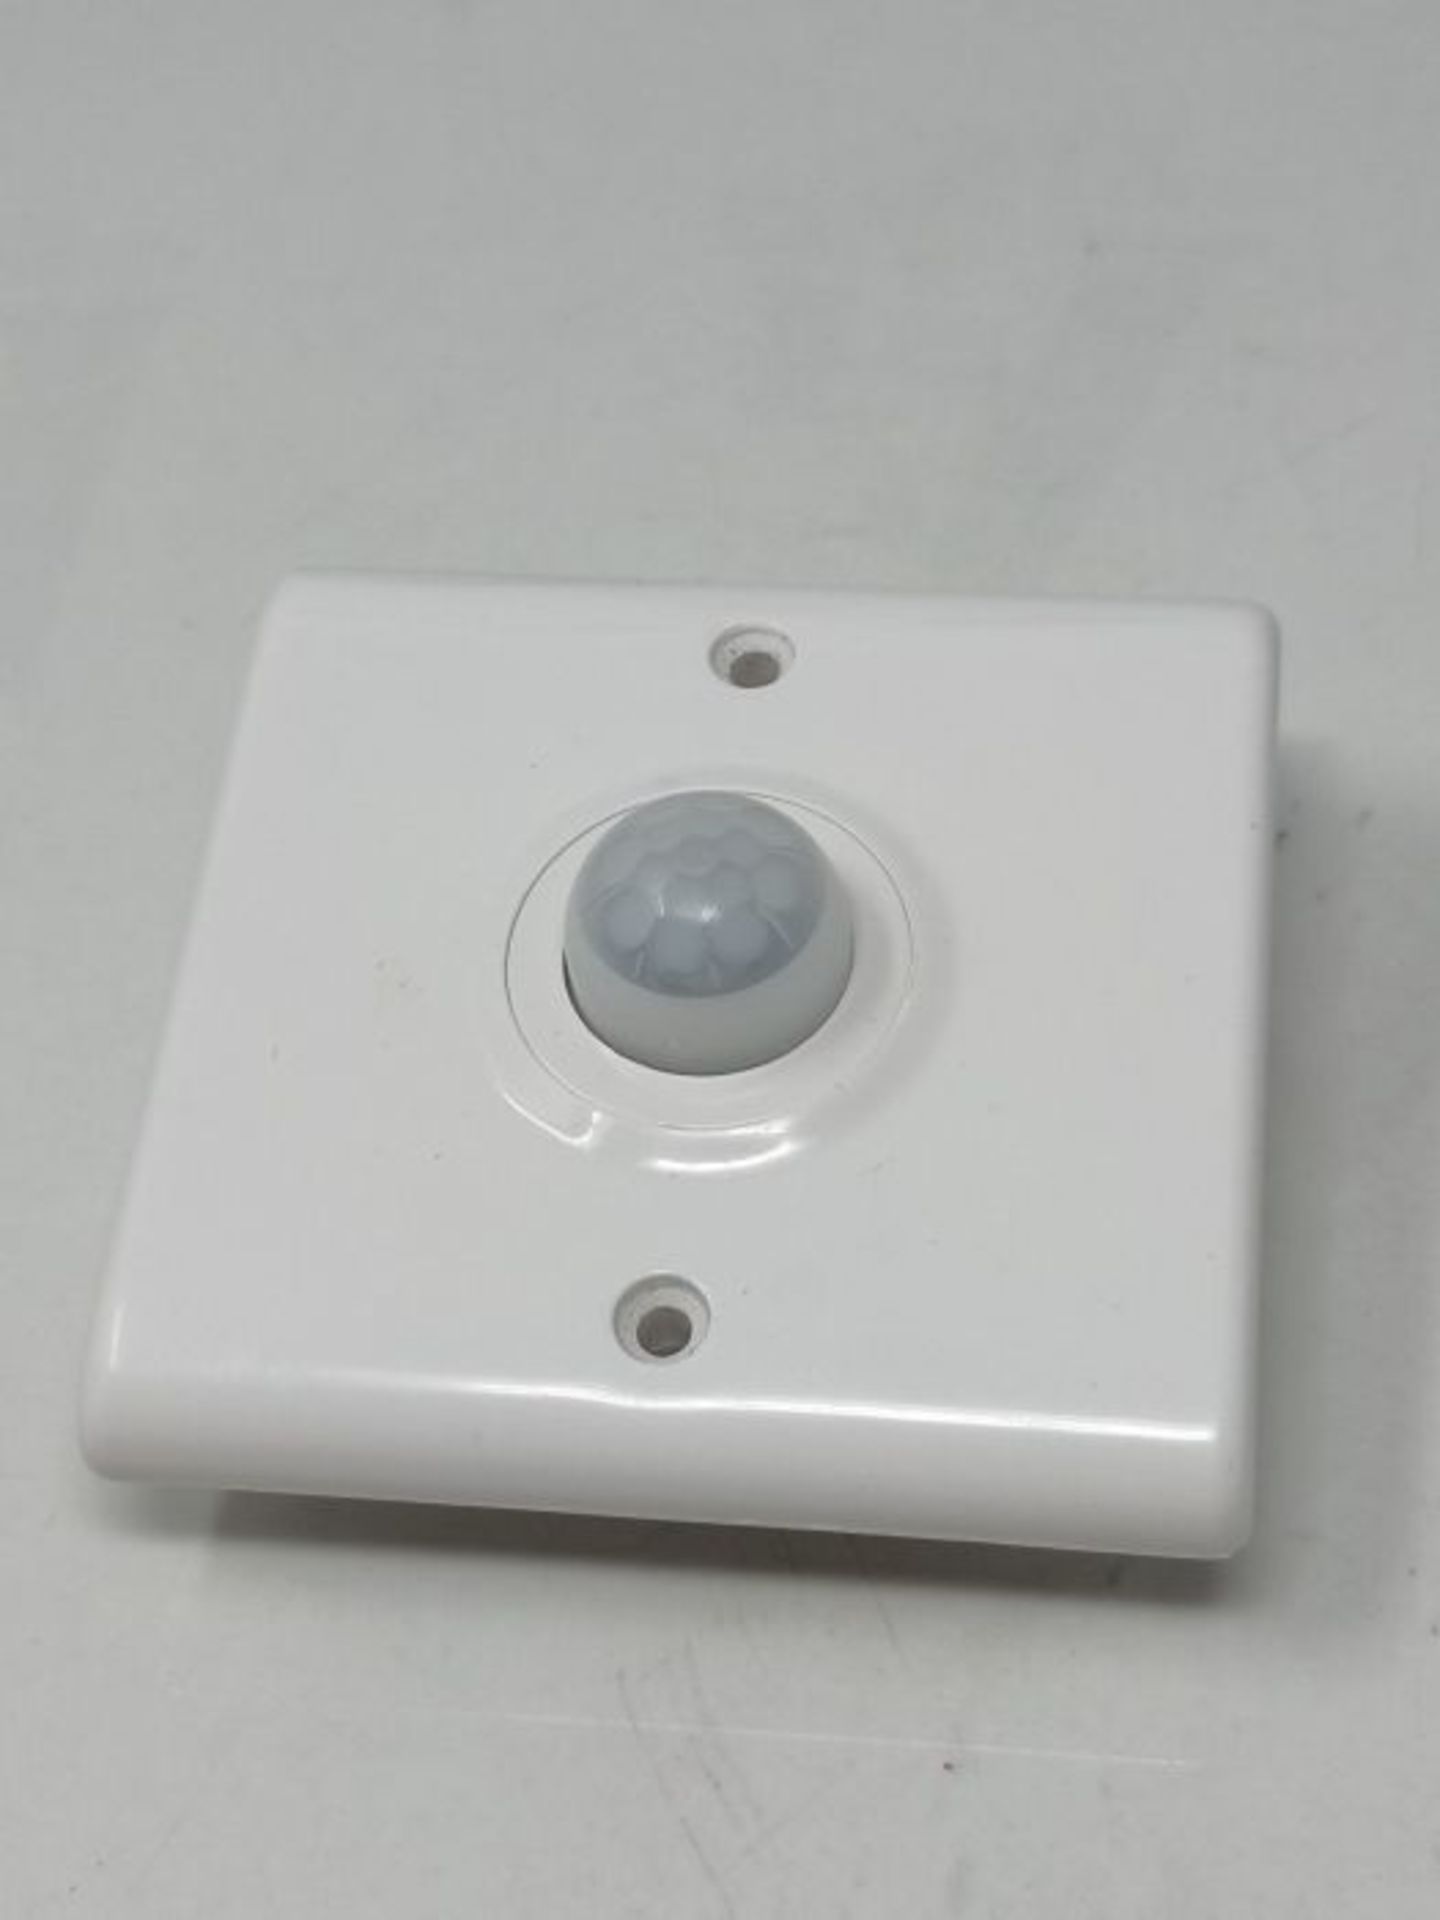 RRP £59.00 Elkay Columbus PIR Sensor with Timer and lux Adjustment, ABS, White, Standard Switch S - Image 2 of 3